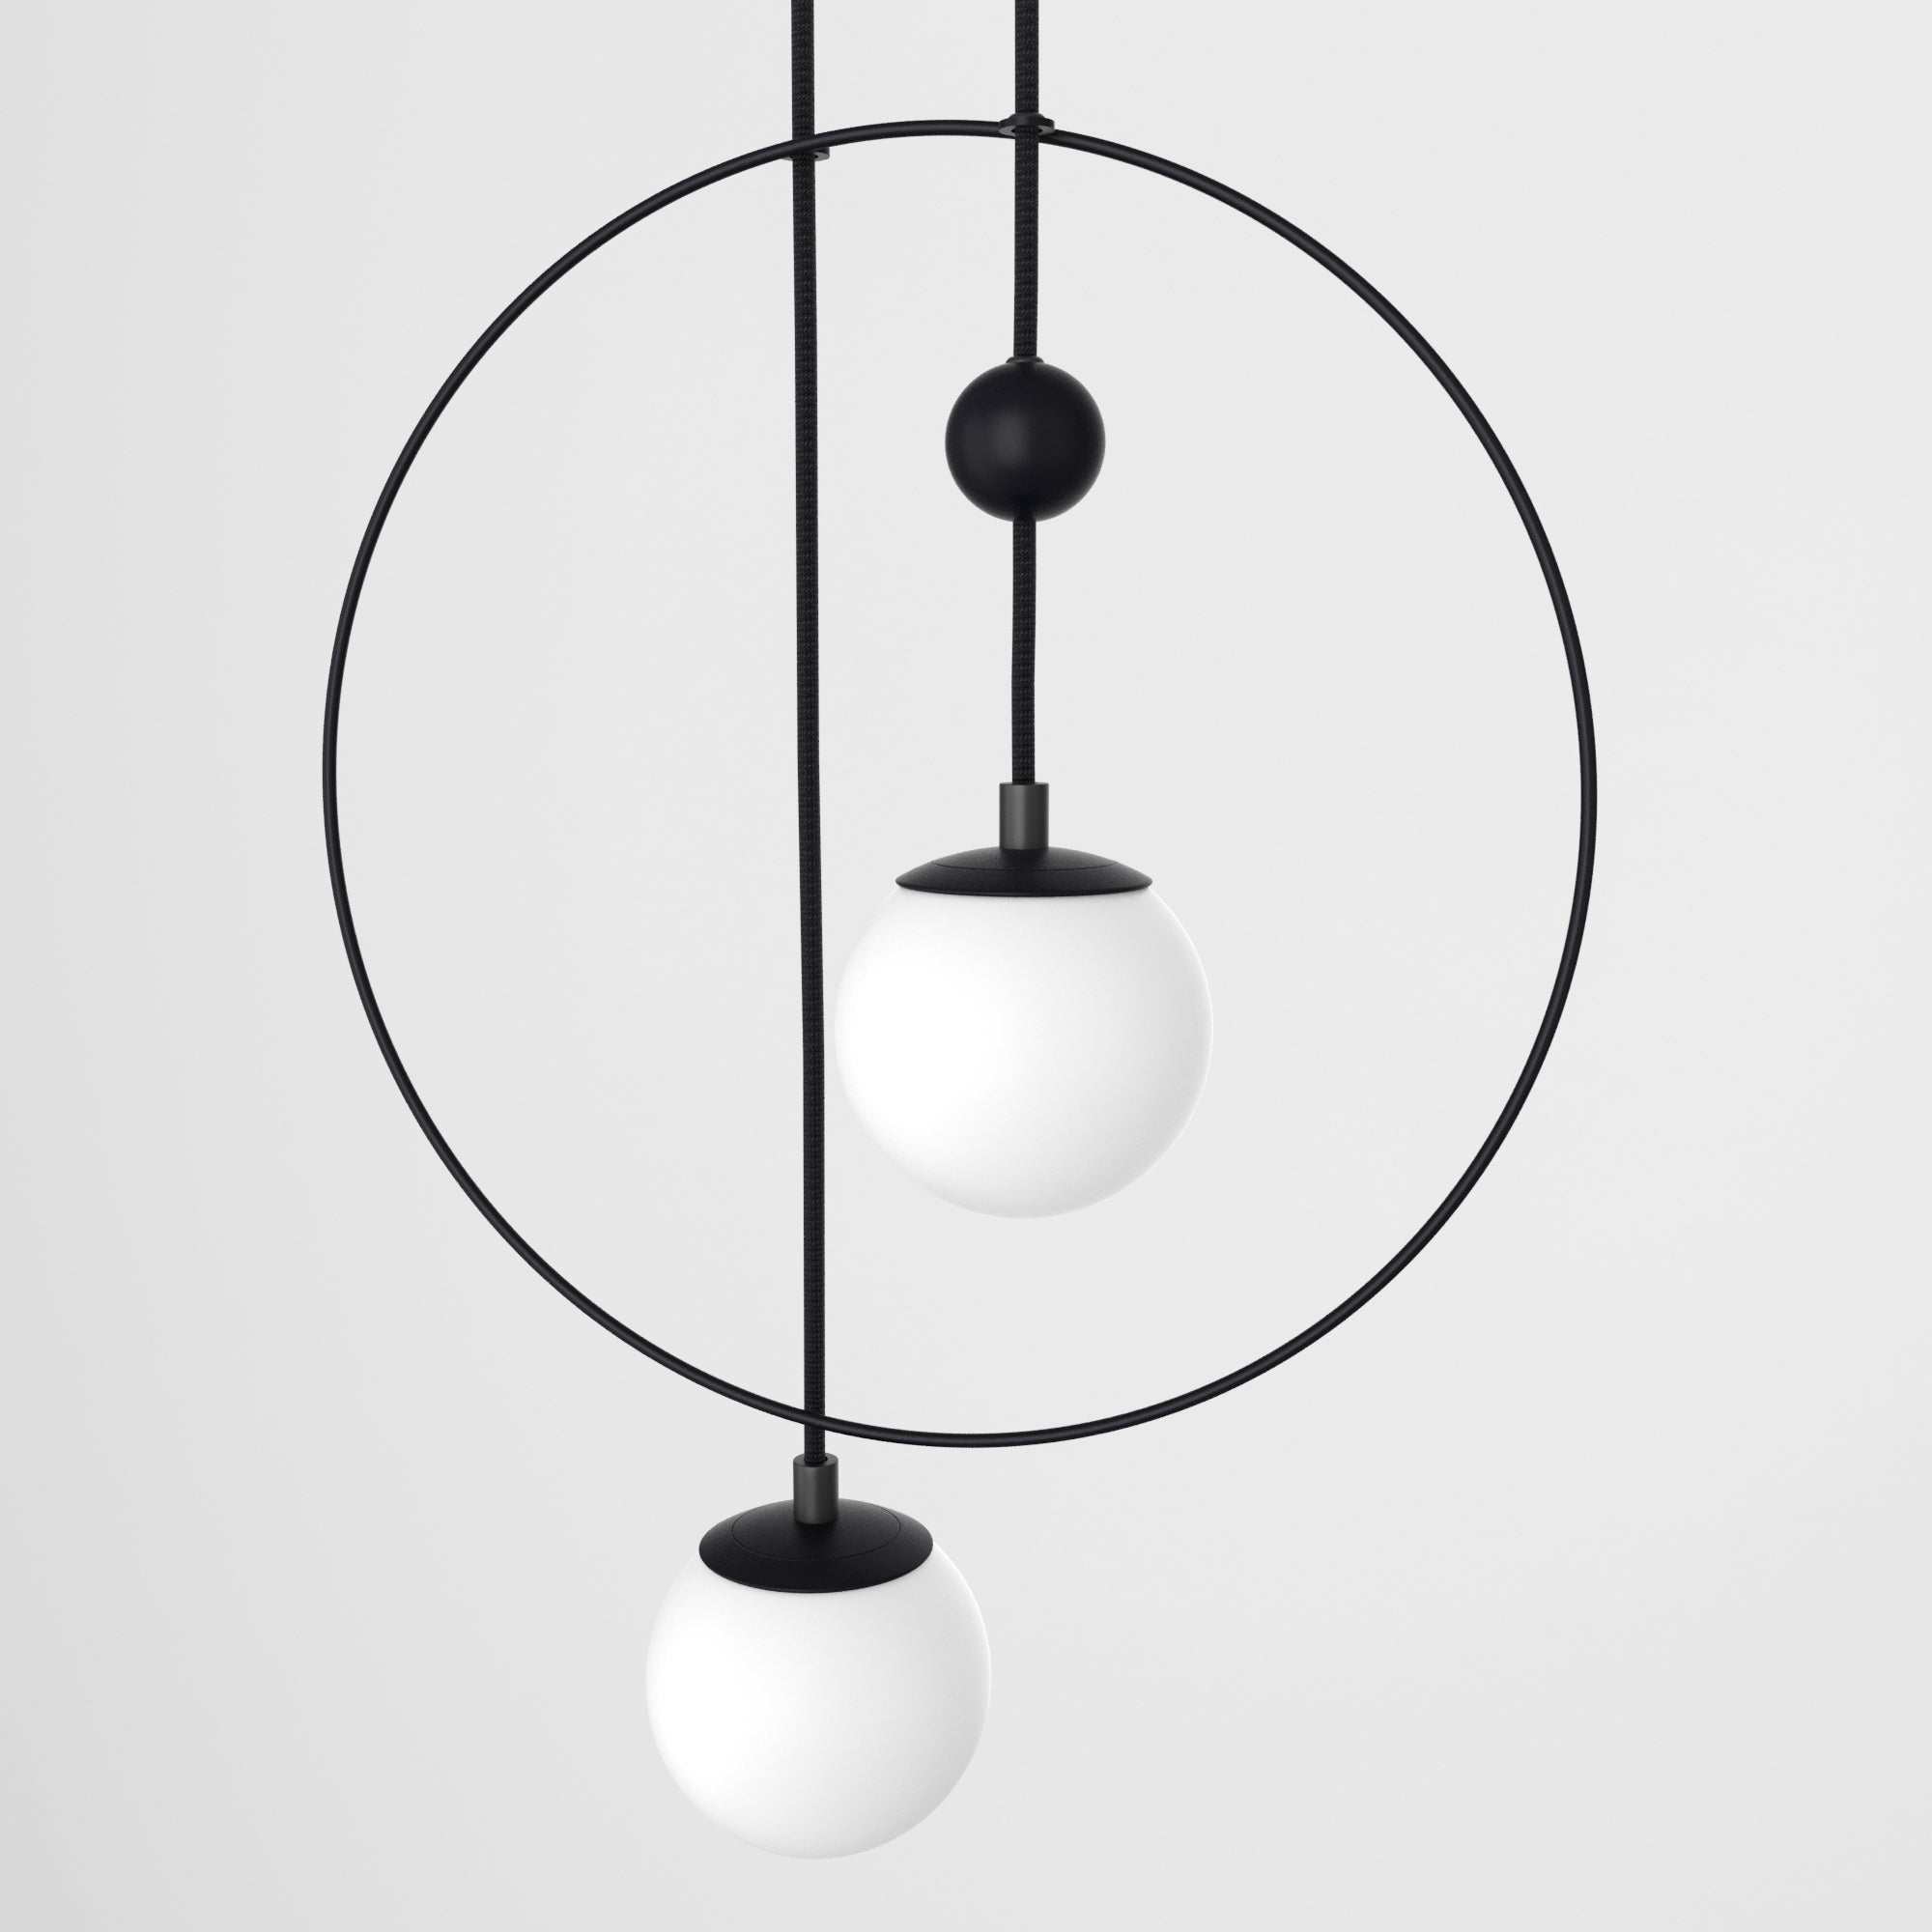 Sunderline 2B (2glass sphere)

Category: Lighting
Type: Pendant, Chandelier 
Material: steel, frosted glass, textile cable
Overall dimensions: H: 2100 mm / W: 400 mm
Light source: 2 * G9, 110-220V
Available in different colors according to RAL